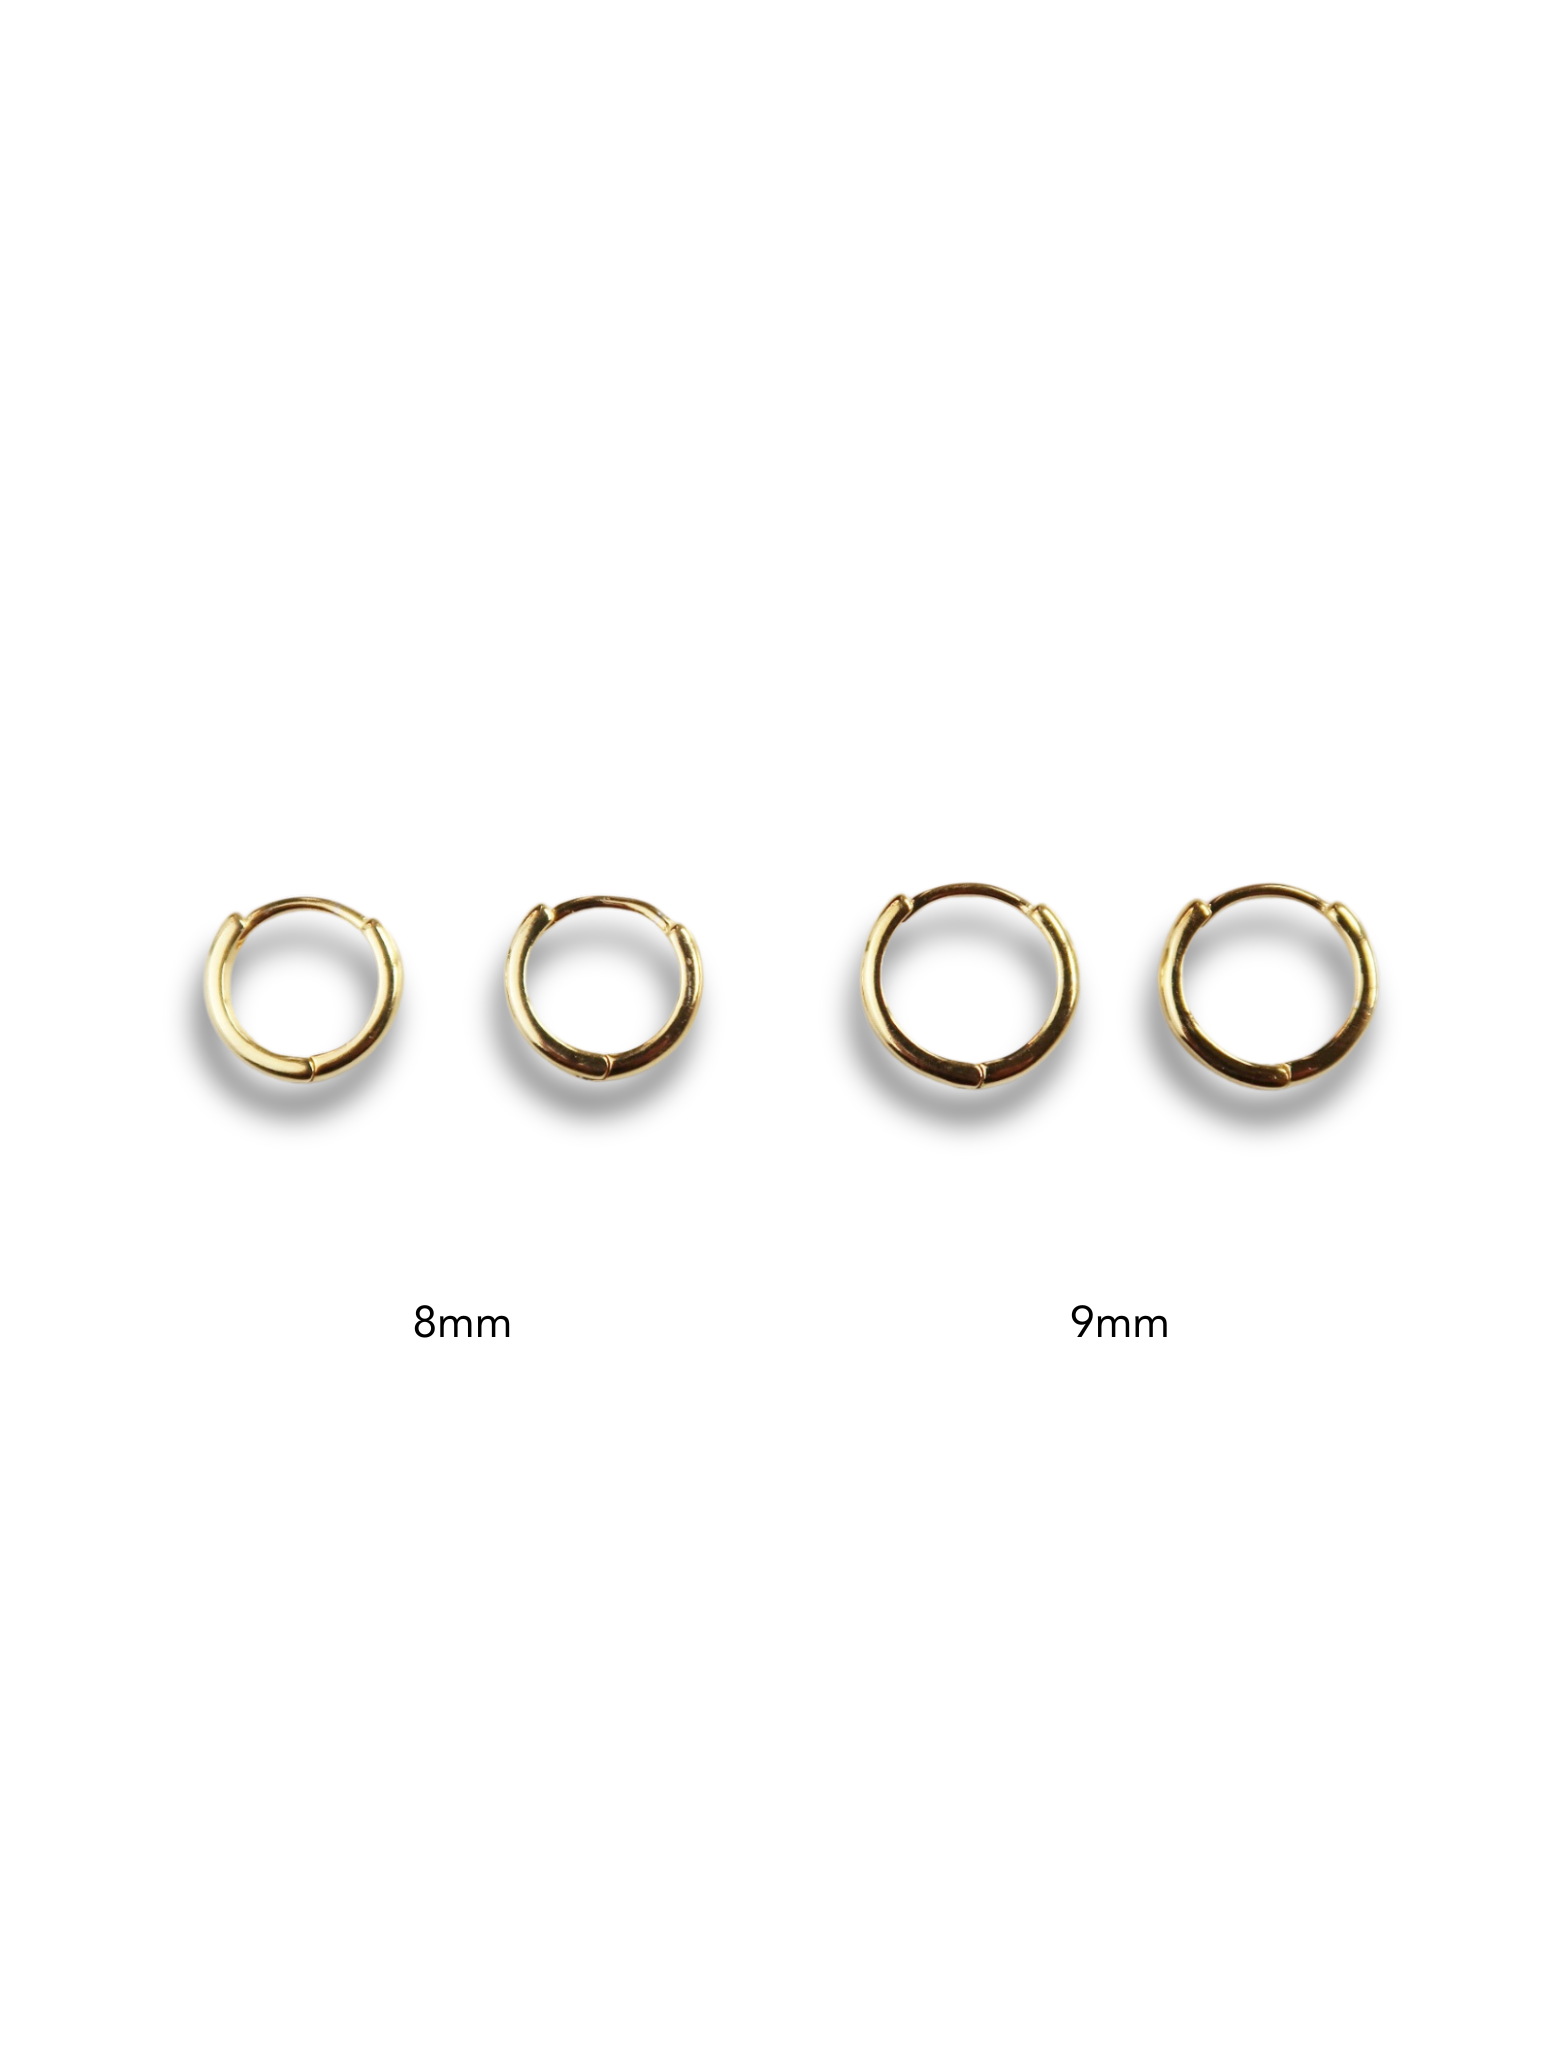 Golden Sterling Silver Hoops - Esah and Co